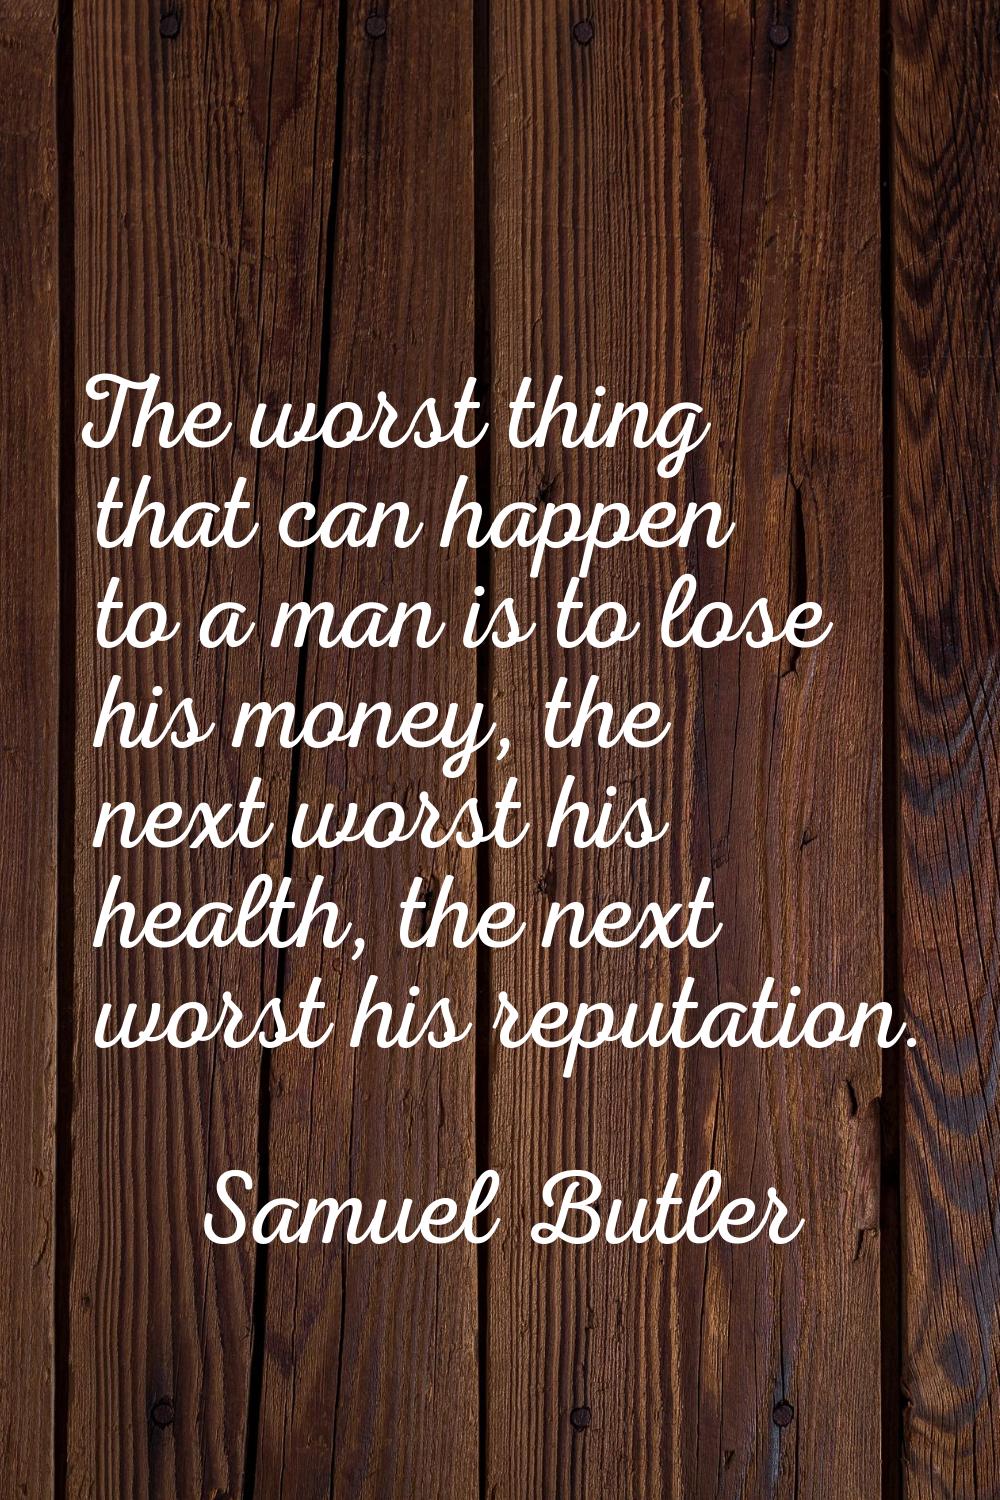 The worst thing that can happen to a man is to lose his money, the next worst his health, the next 